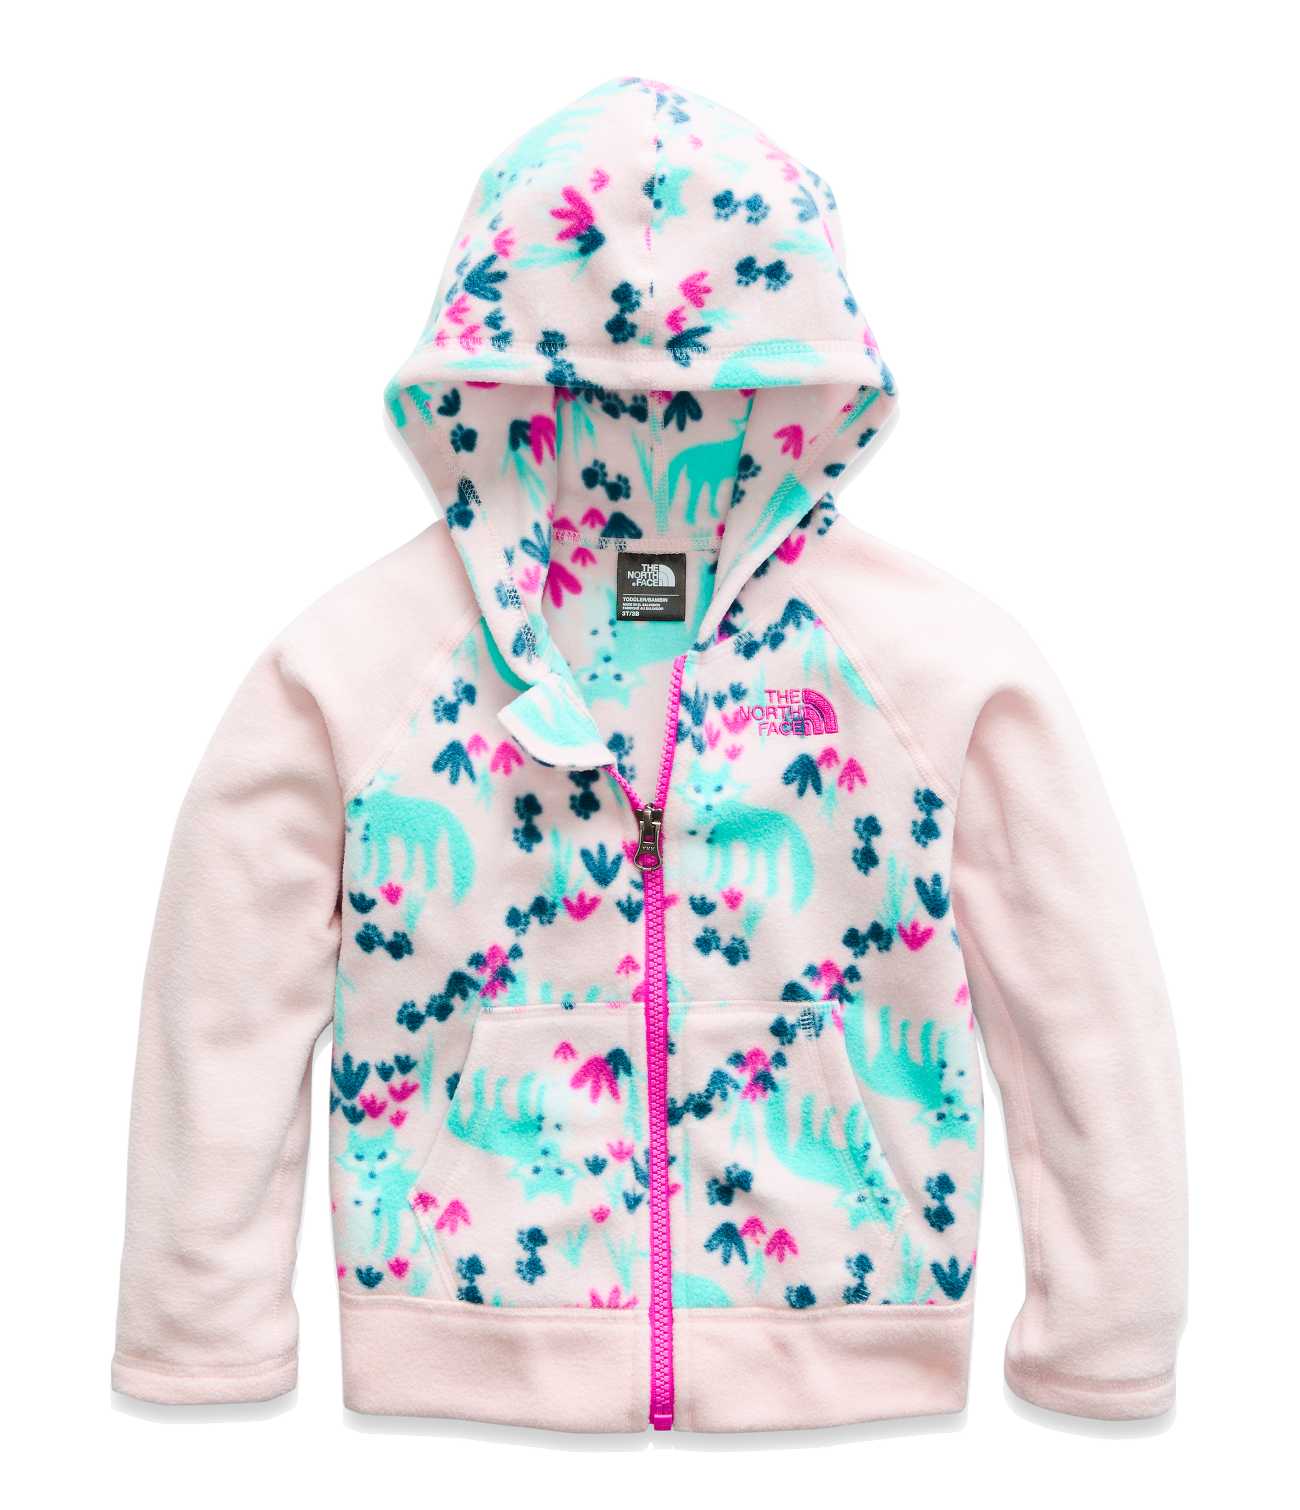 The North Face Toddlers' Glacier Full-Zip Hoodie